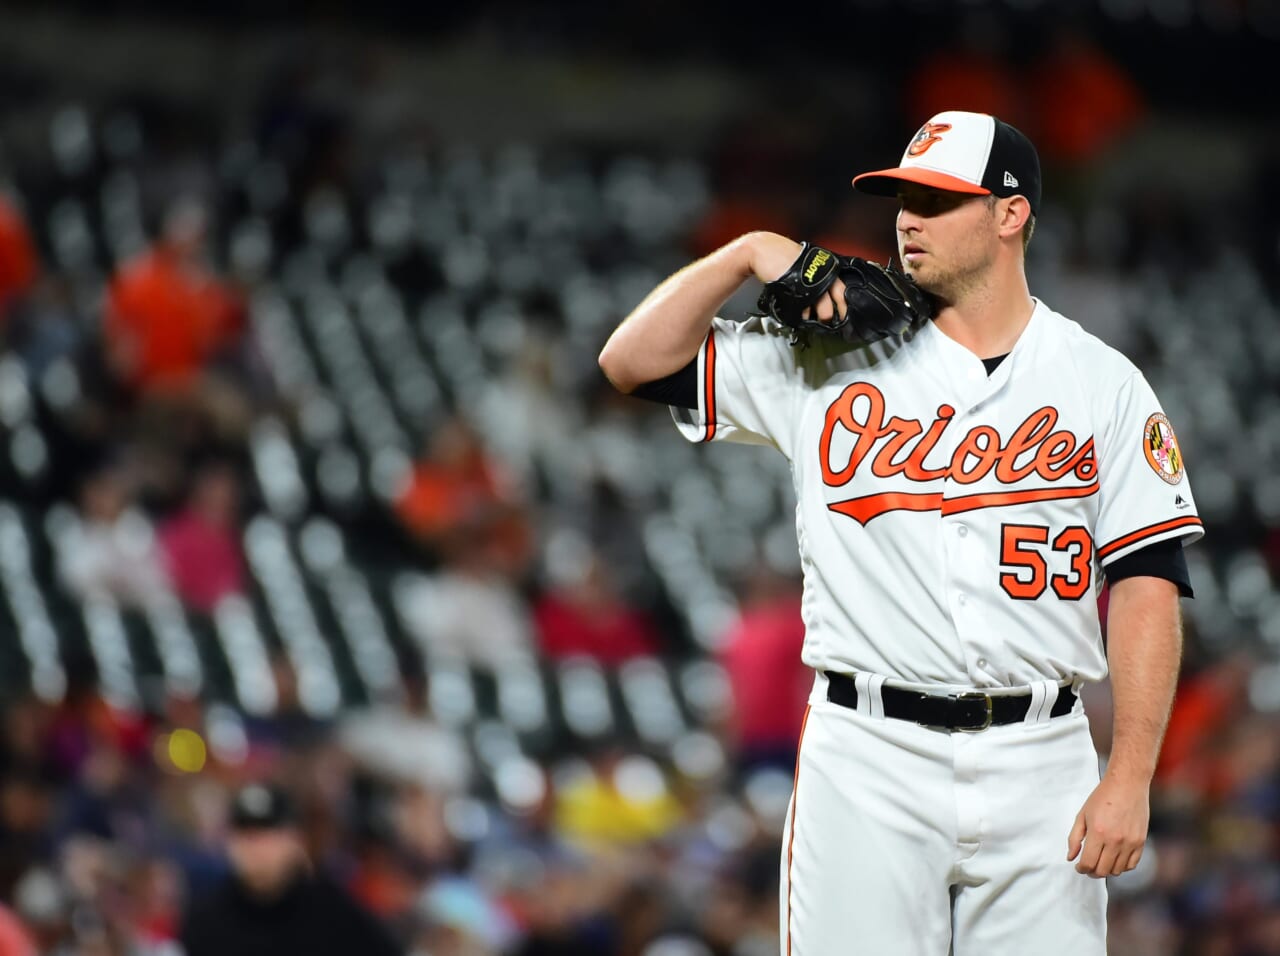 Yankees reliever has no hard feelings with new Metsâ€™ manager Buck Showalter after 2016 playoff game